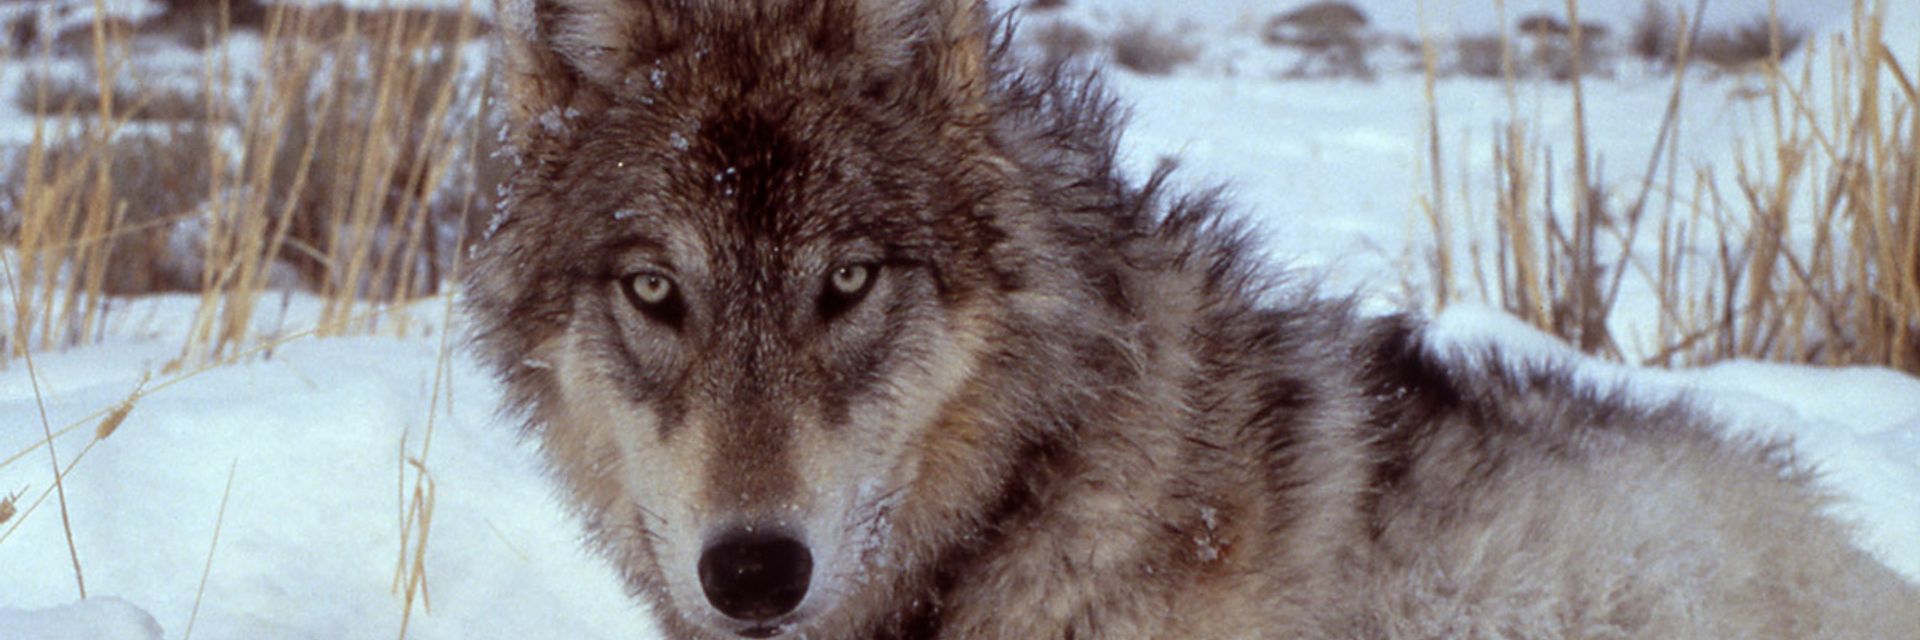 The Remarkable Return of the Wolf to Yellowstone National Park